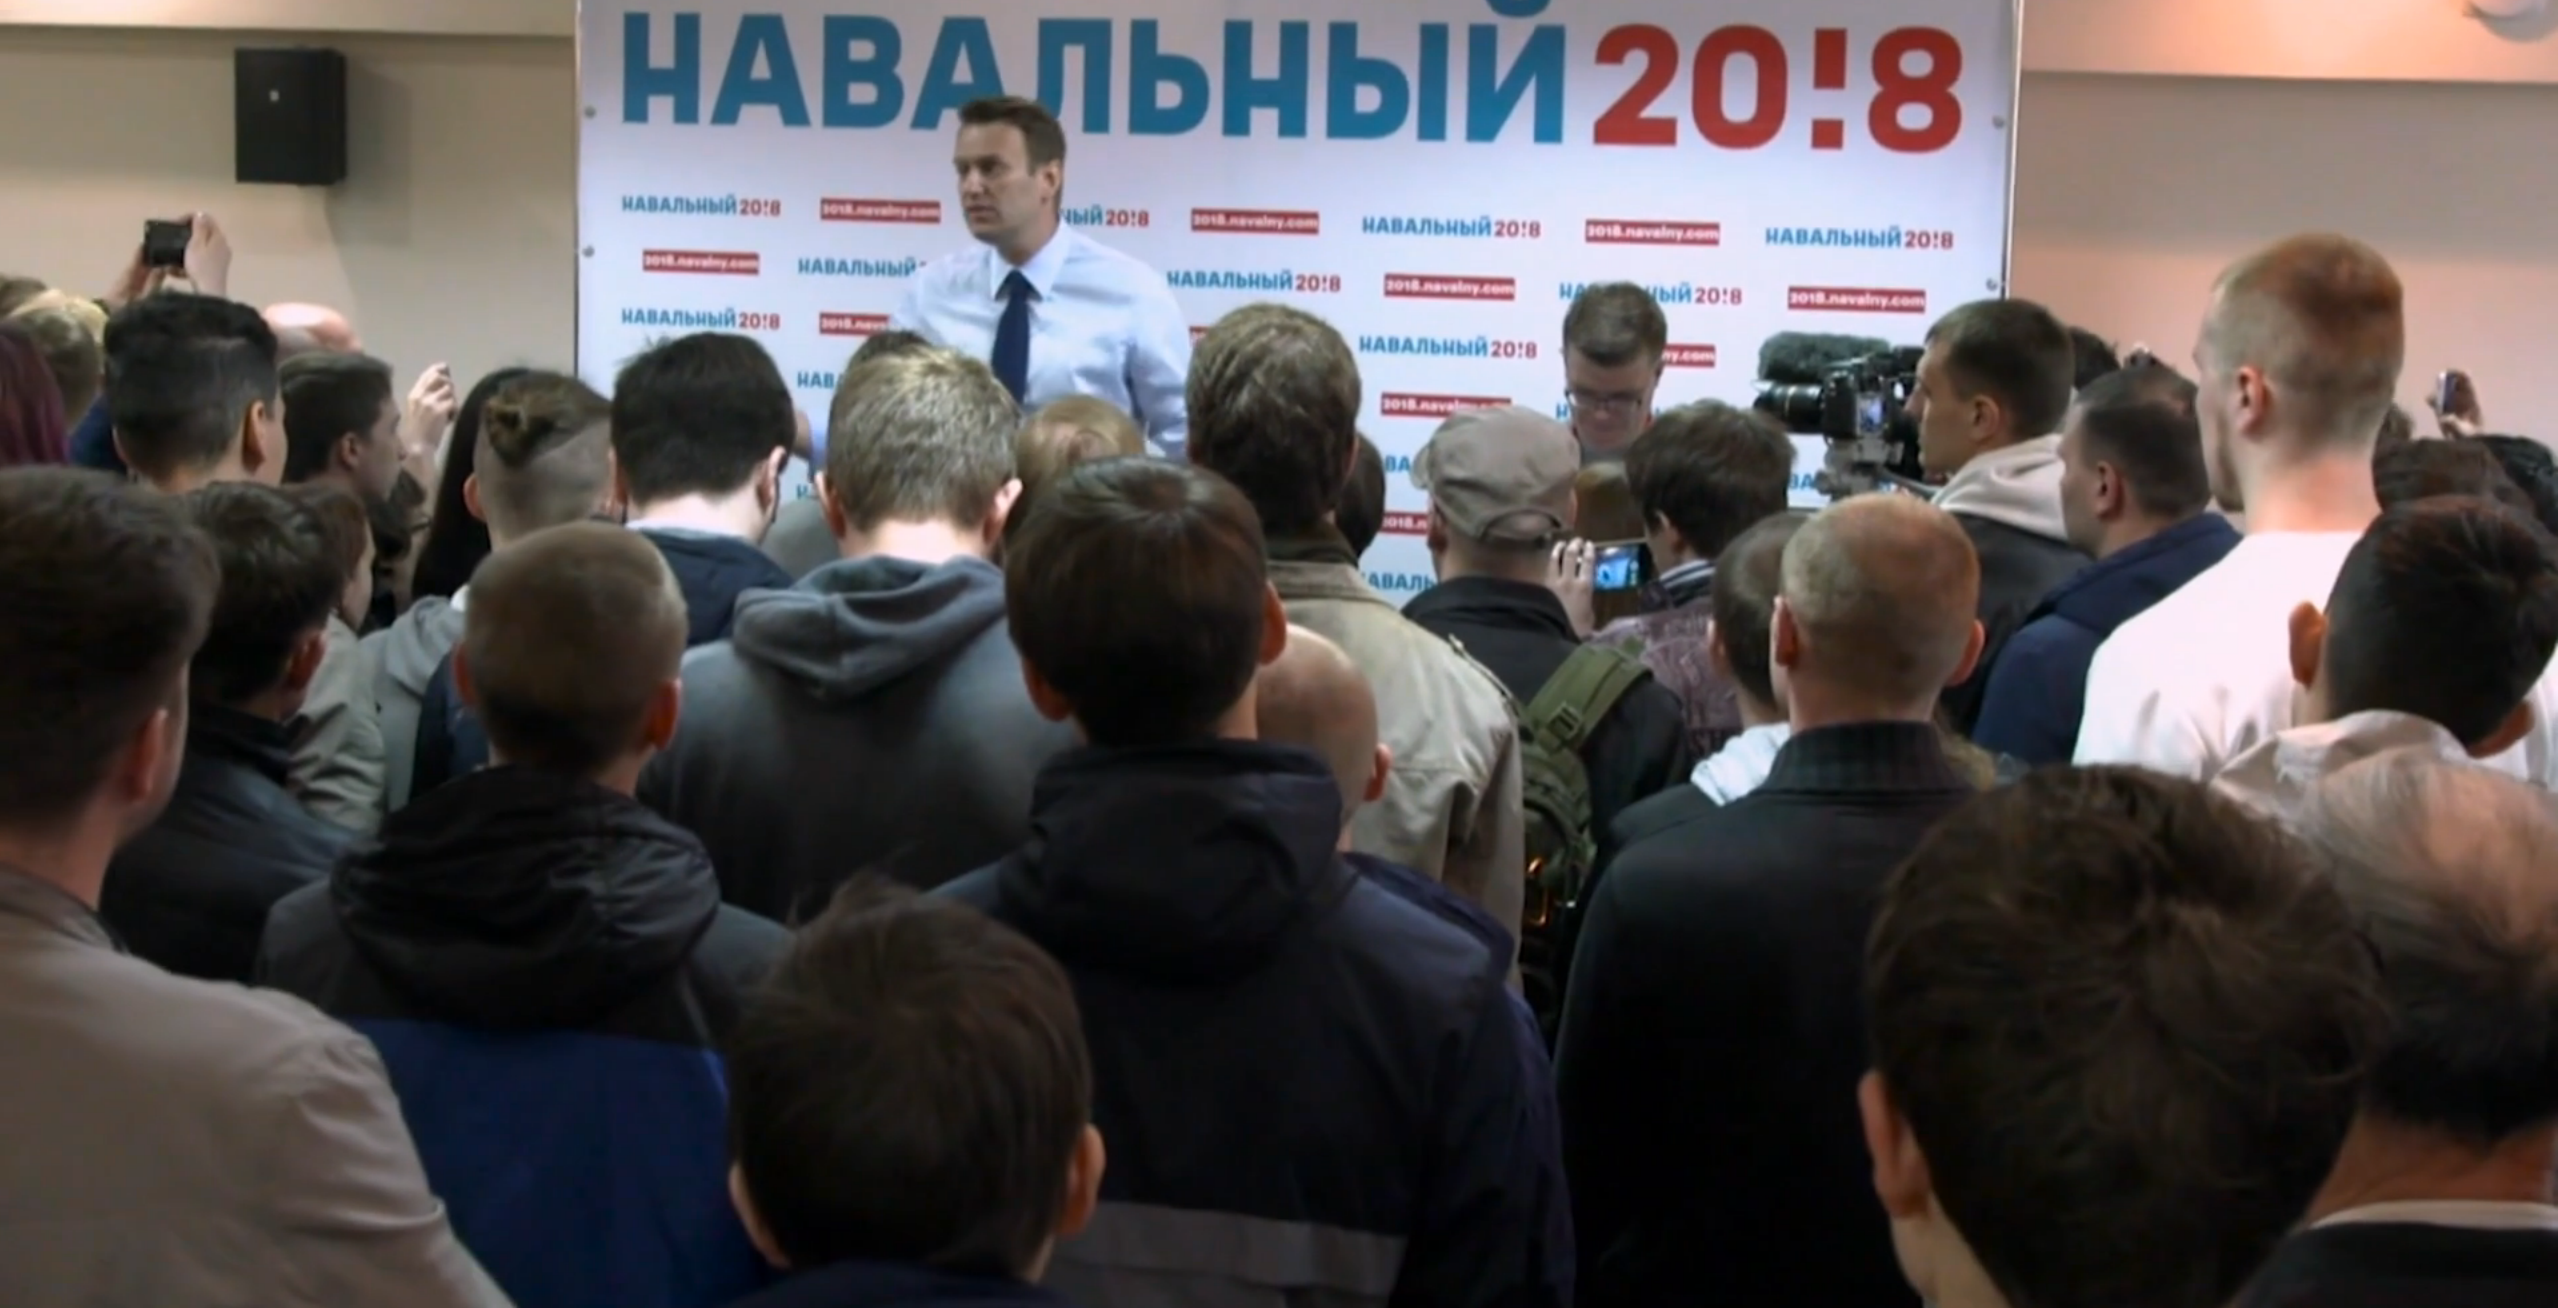 Alexei Navalny, Putin's opposition, at a campaign event. Image from PBS NewsHour. Russia, 2017.